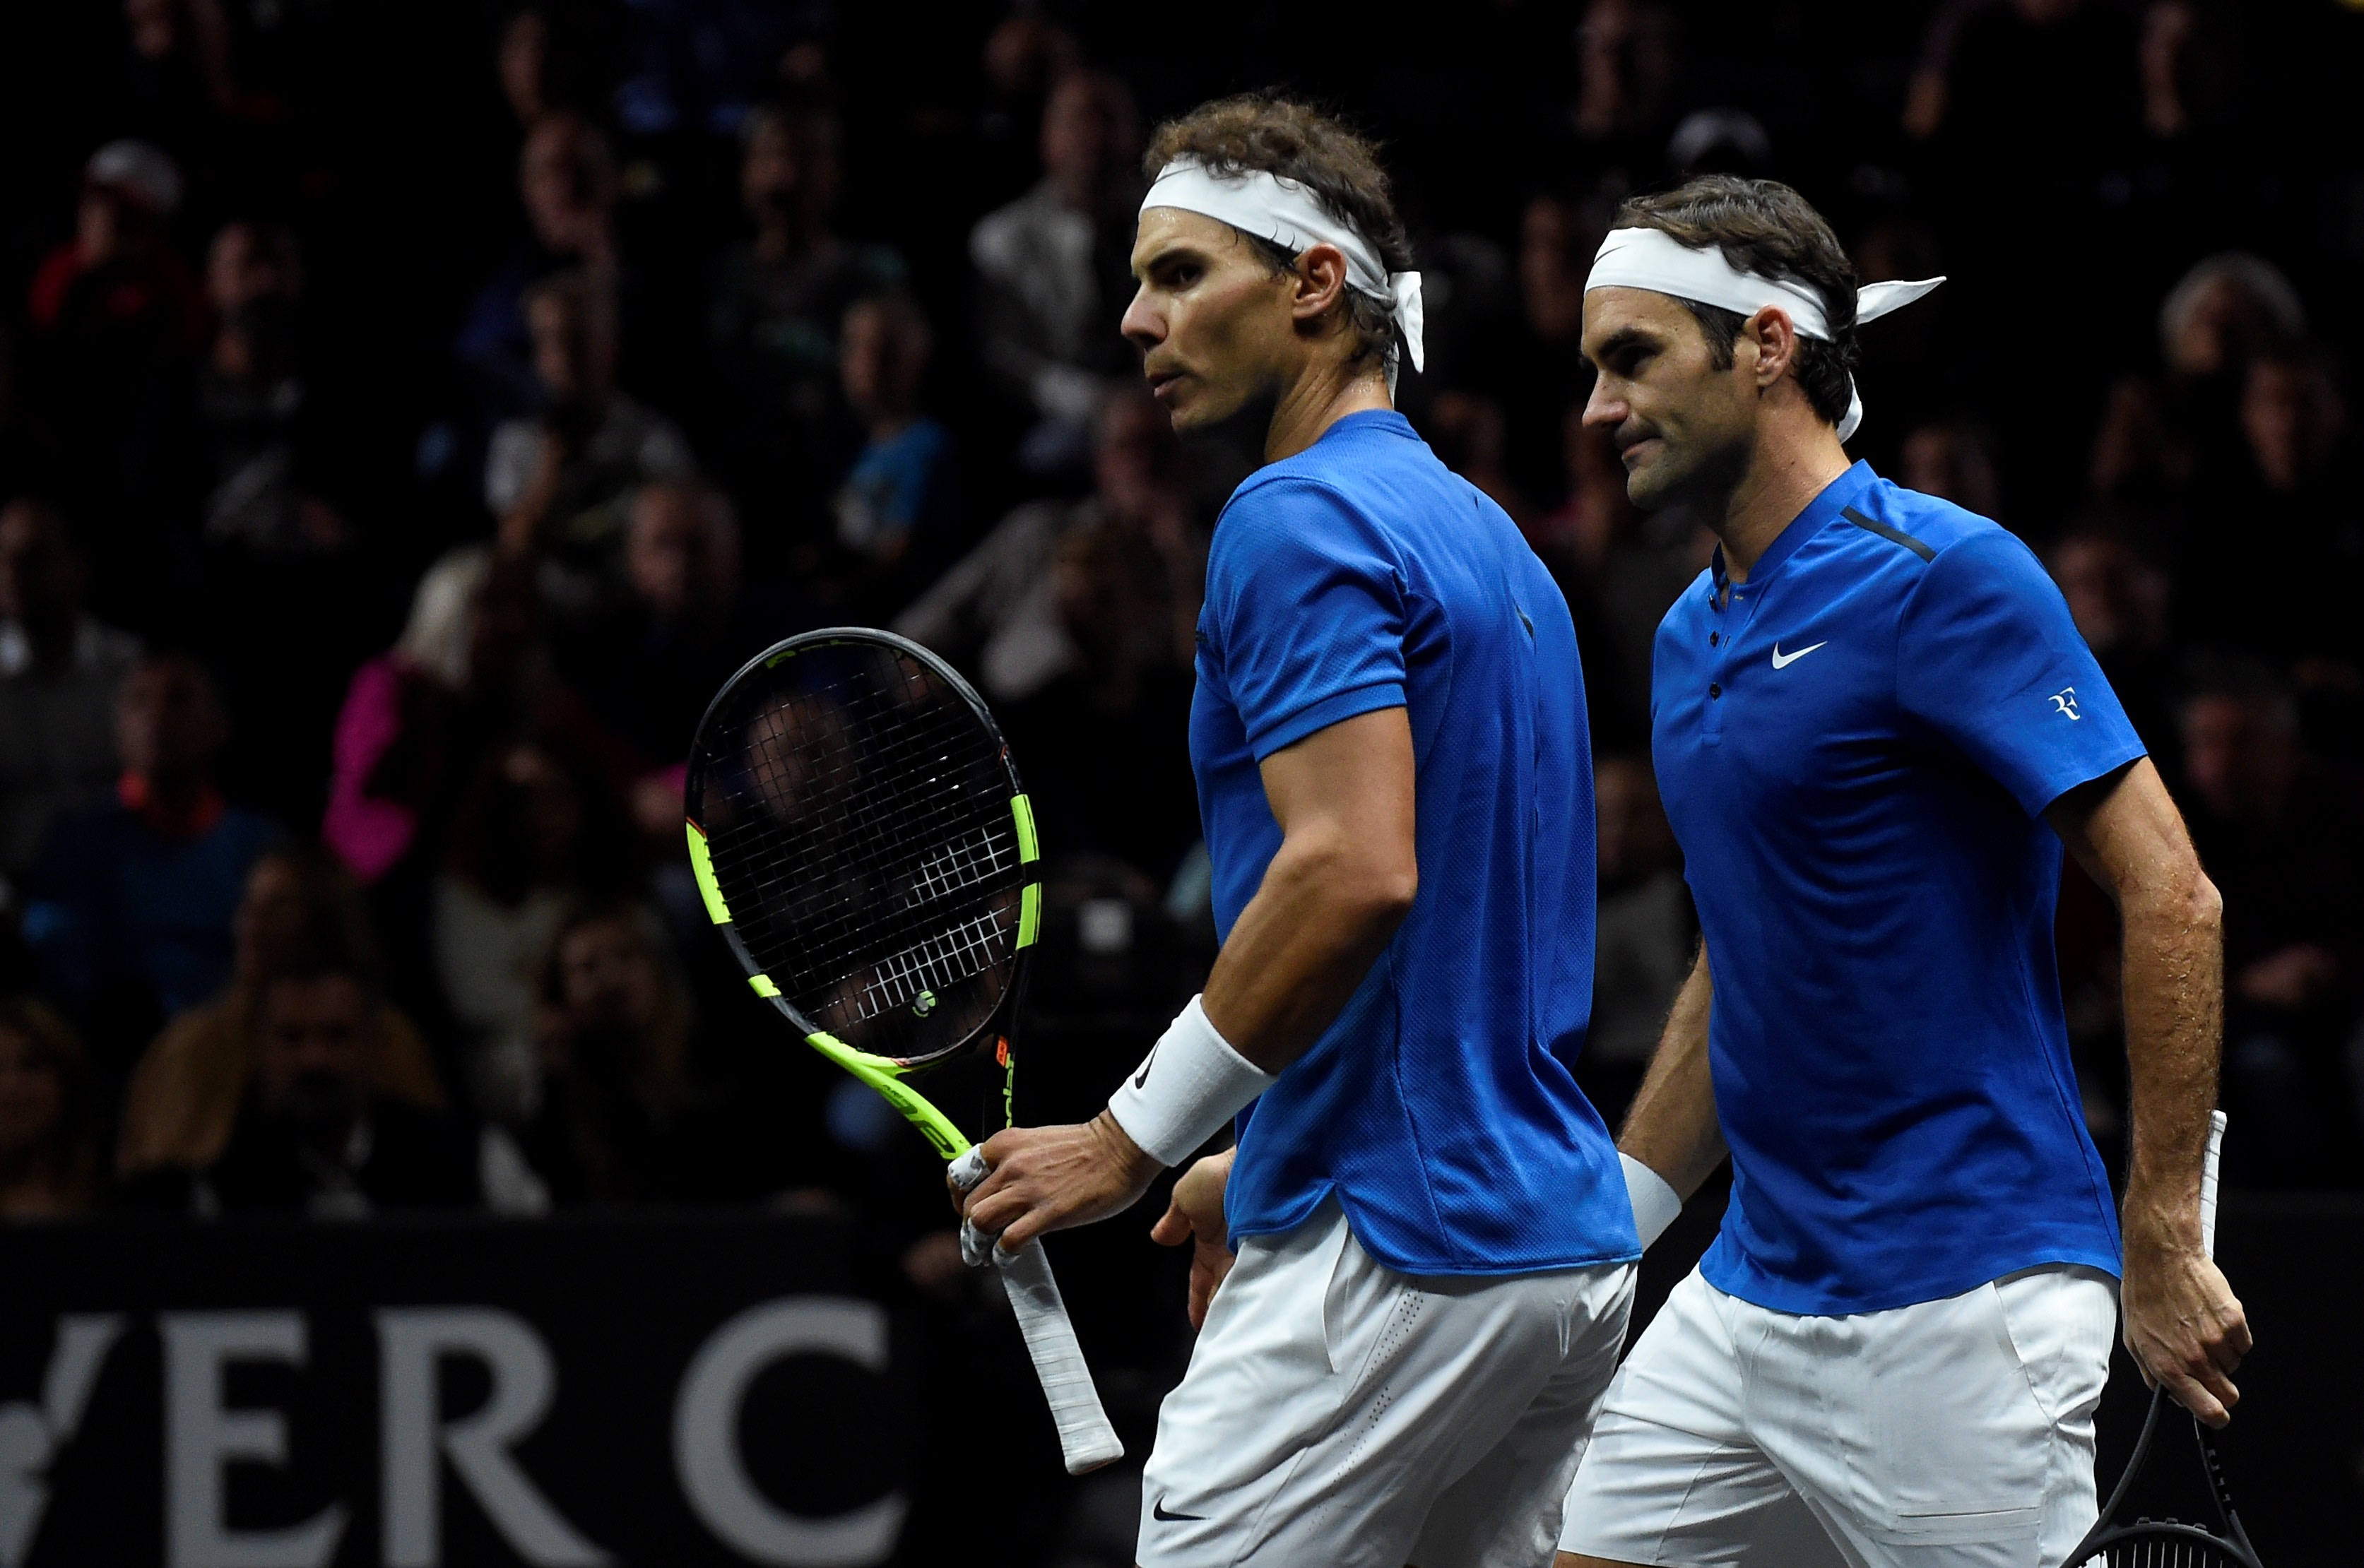 tbt Roger Federer, Rafael Nadal team up for first doubles pairing at 2017 Laver Cup